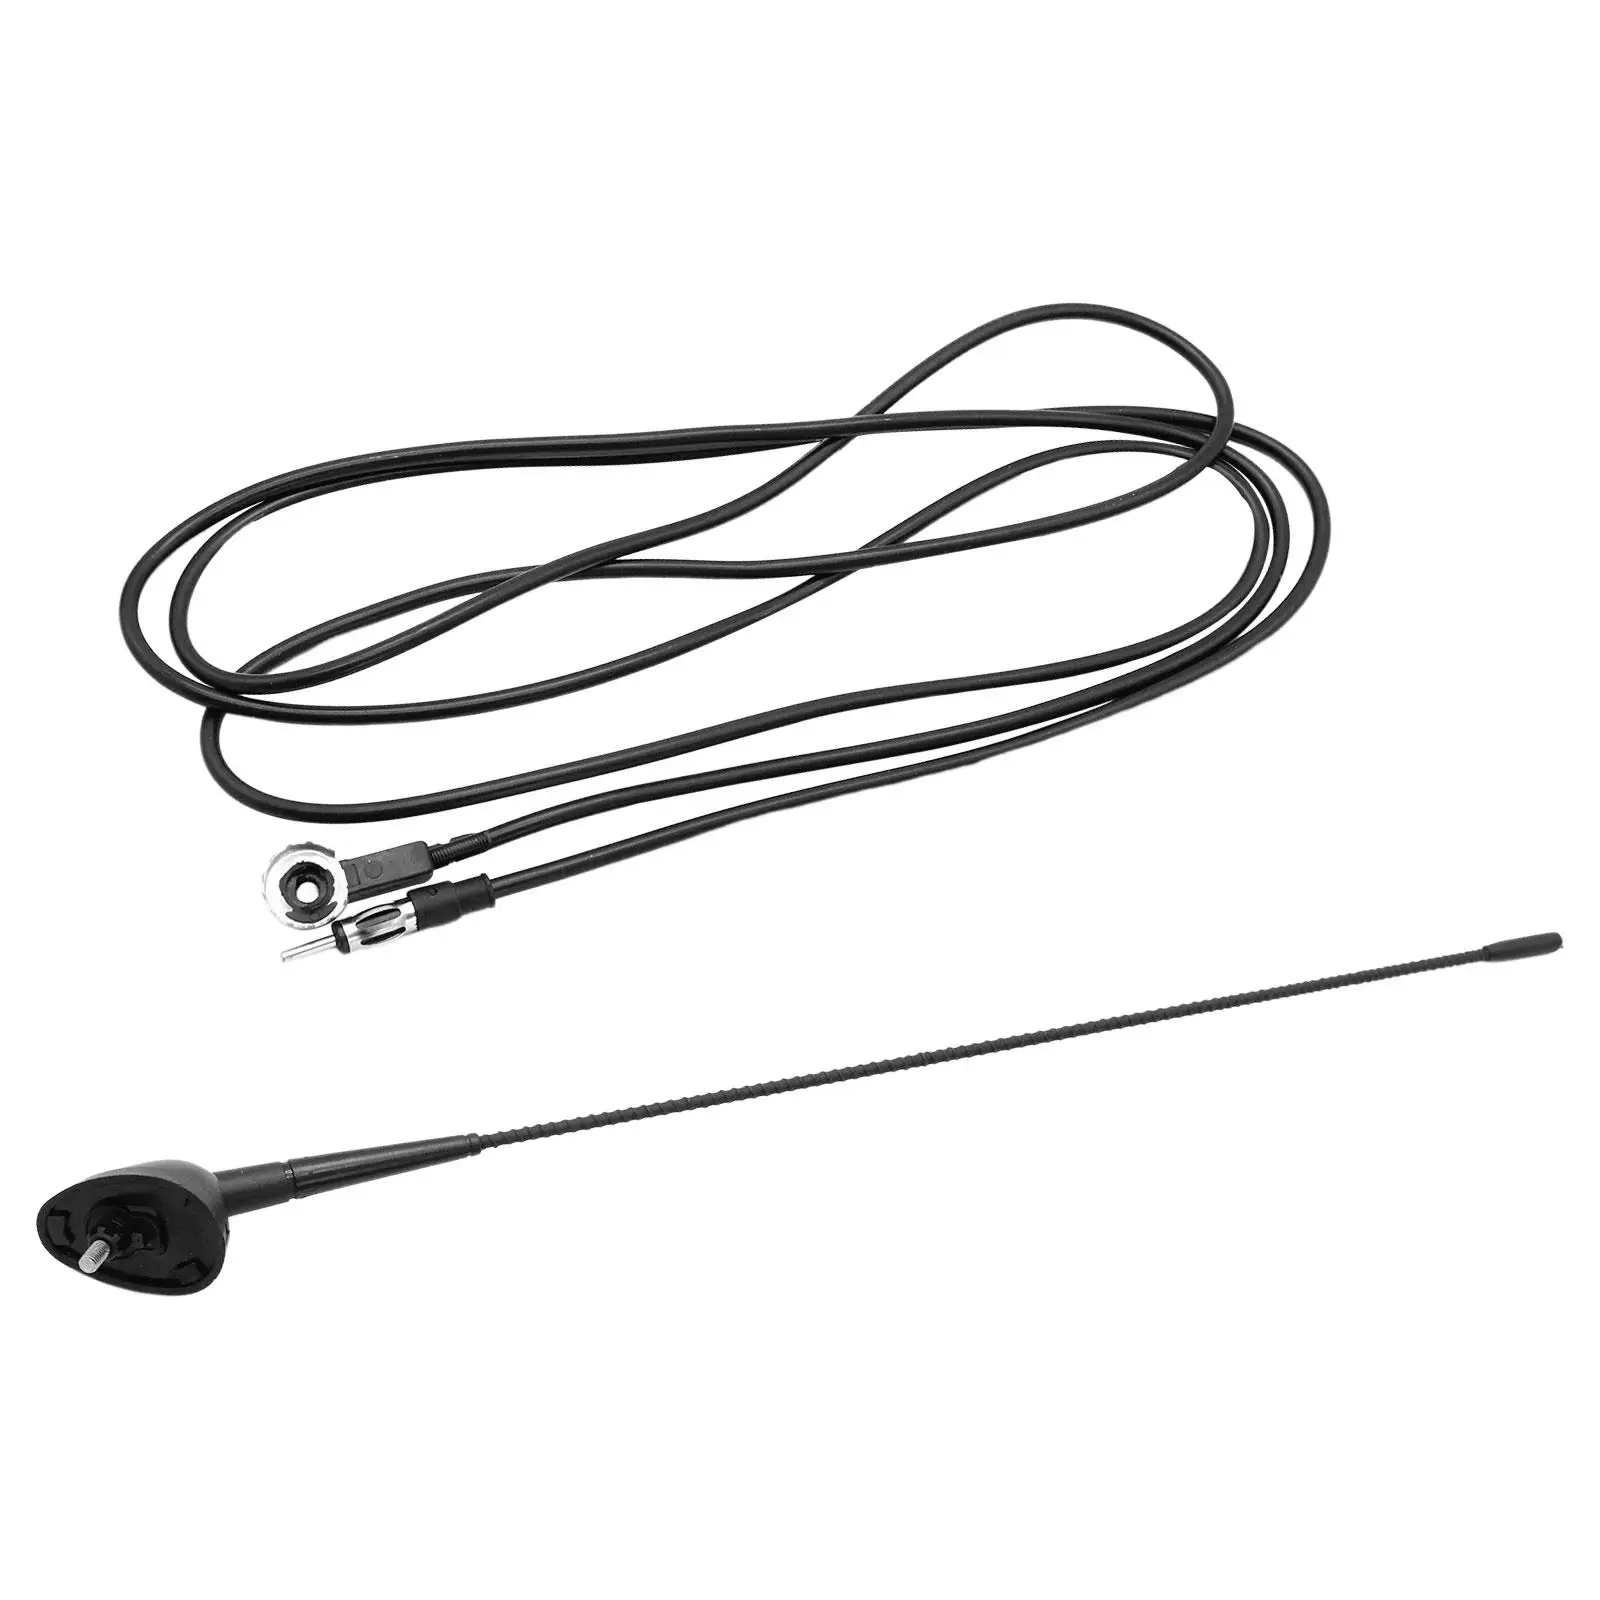 

Front Roof Aerial Antenna Mast Cable 2858939969 High Quality Car Accessories for Fiat PUNTO Croma Regata Fiorino Ulysse